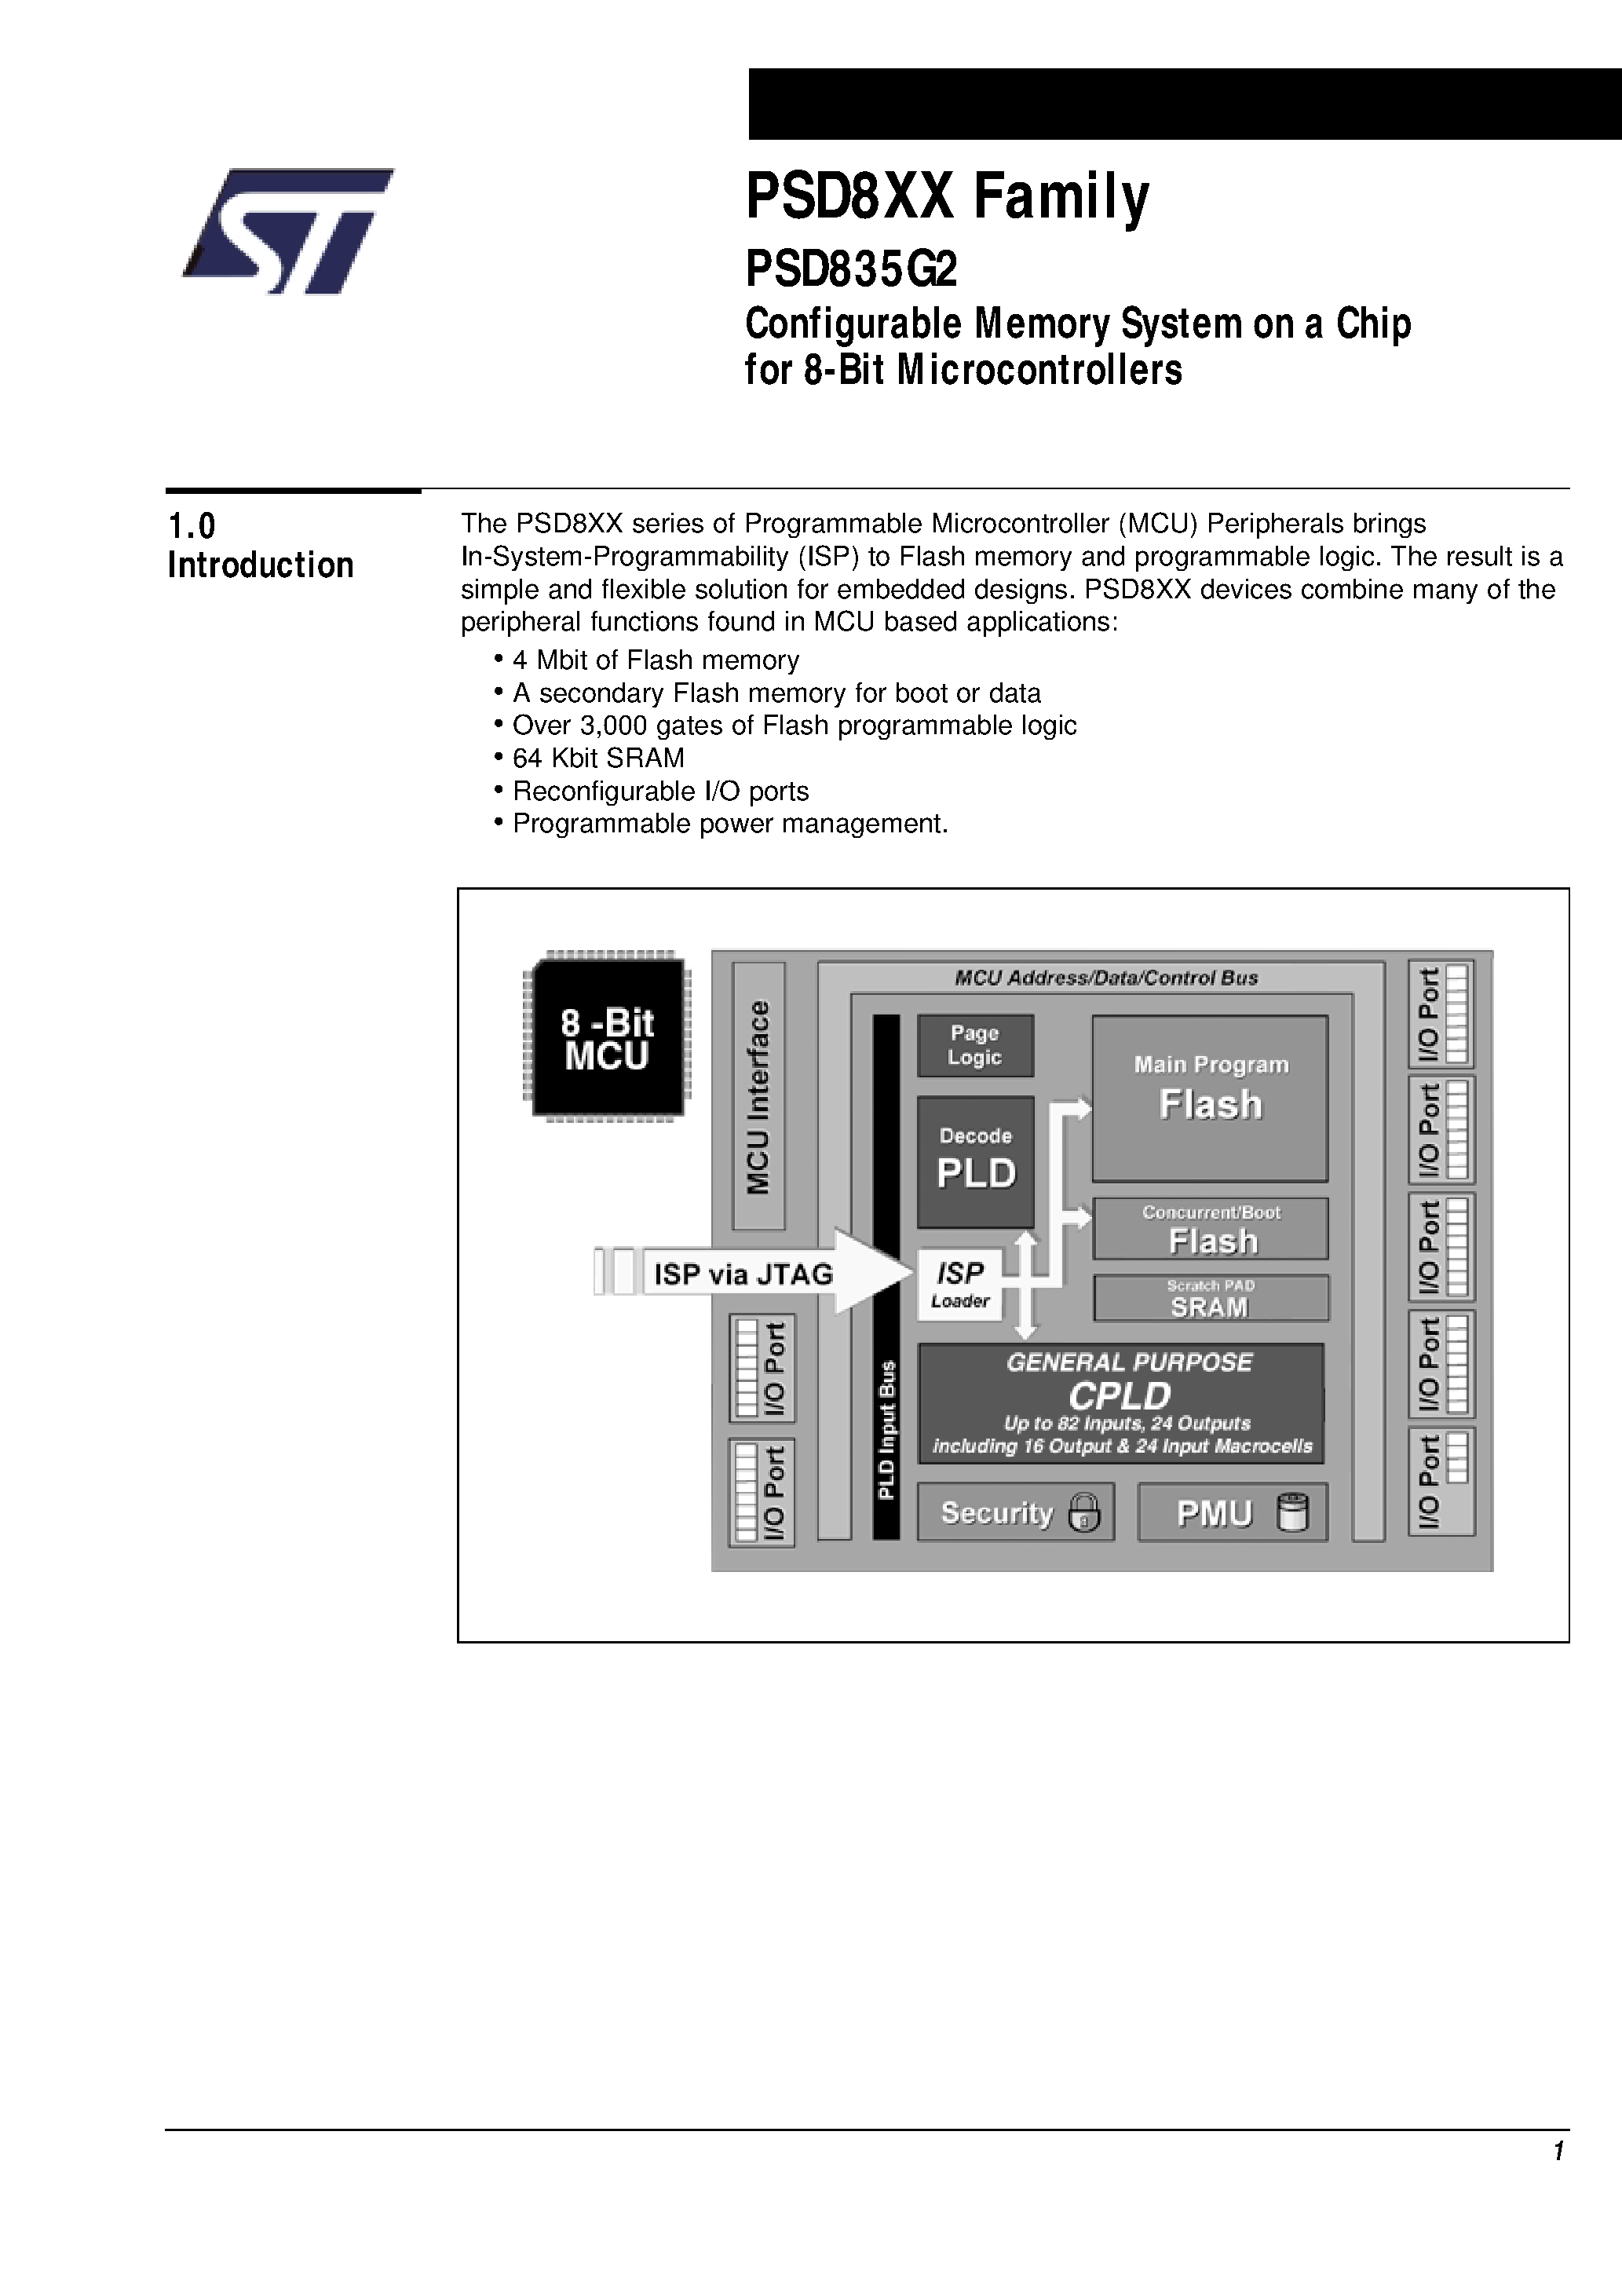 Datasheet PSD835F2-A-12UI - Configurable Memory System on a Chip for 8-Bit Microcontrollers page 2